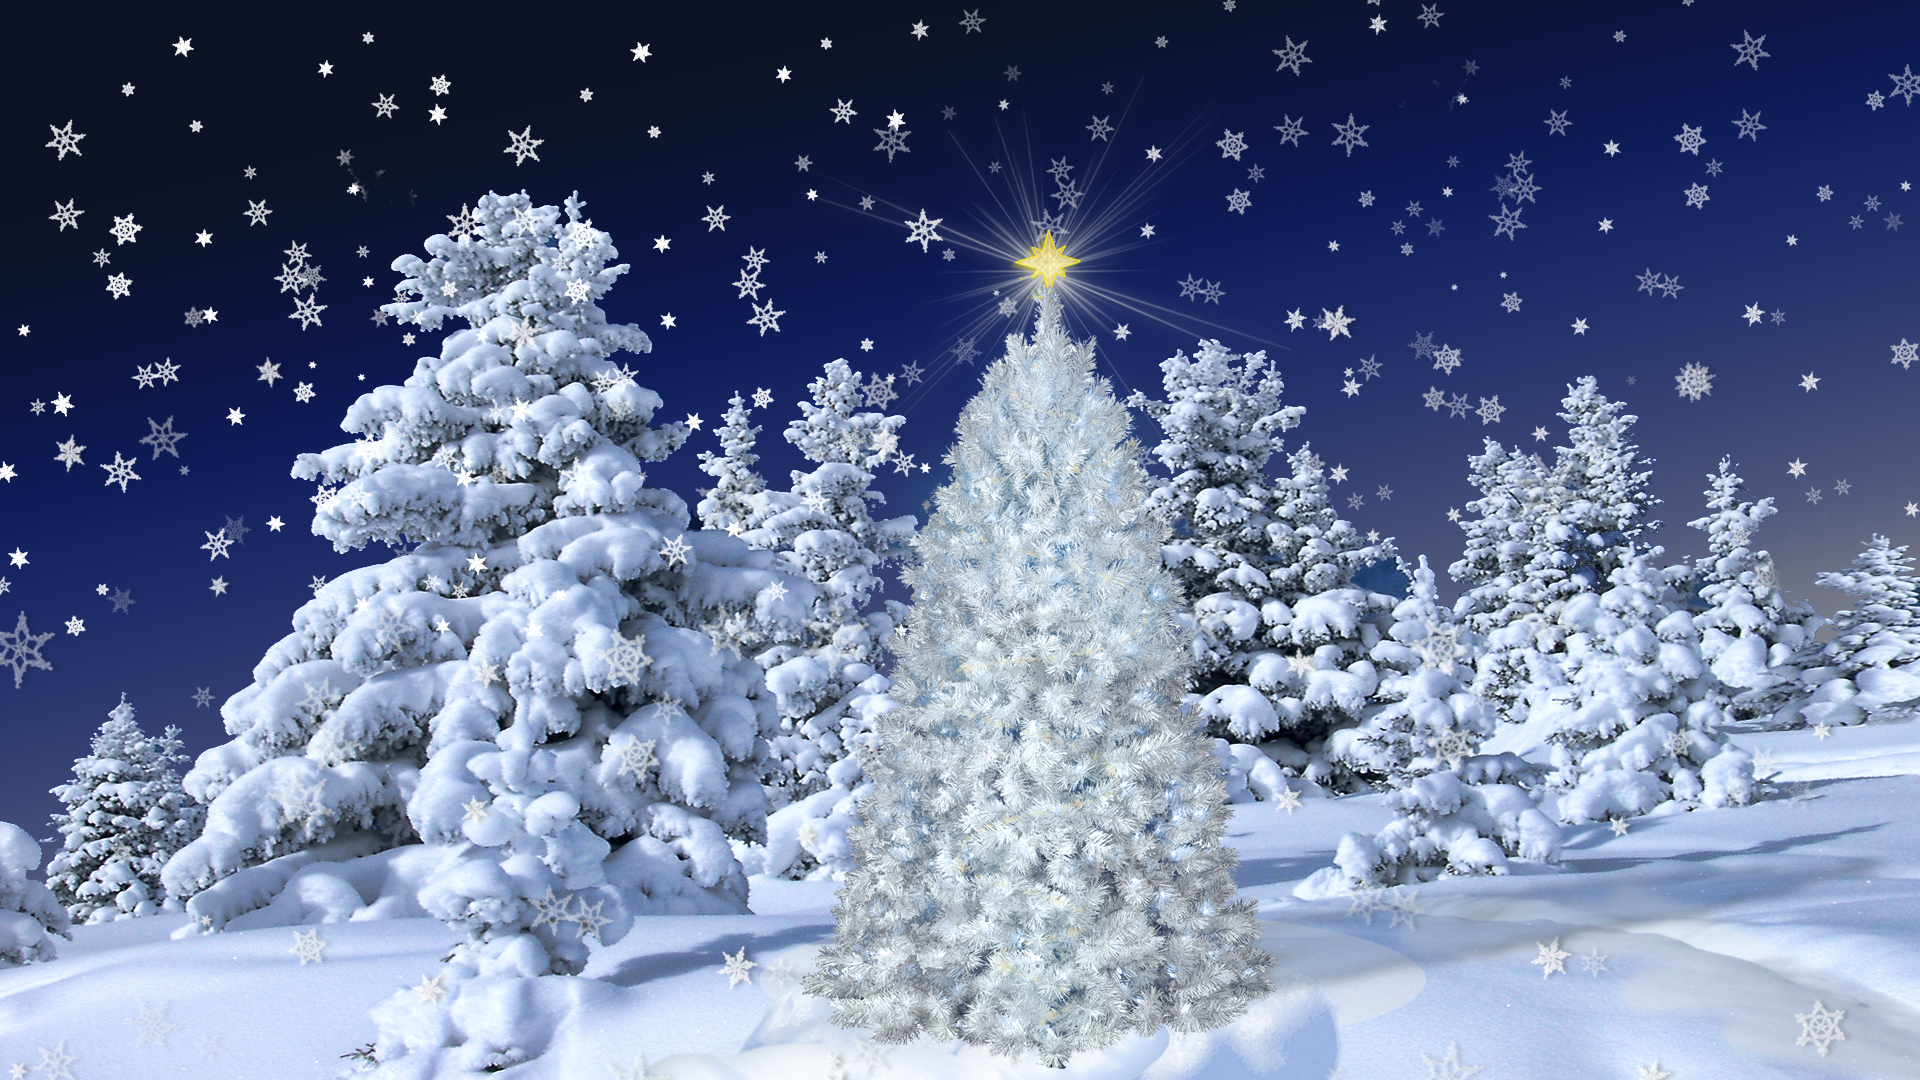 "White Christmas" HD Wallpaper | Background Image | 1920x1080